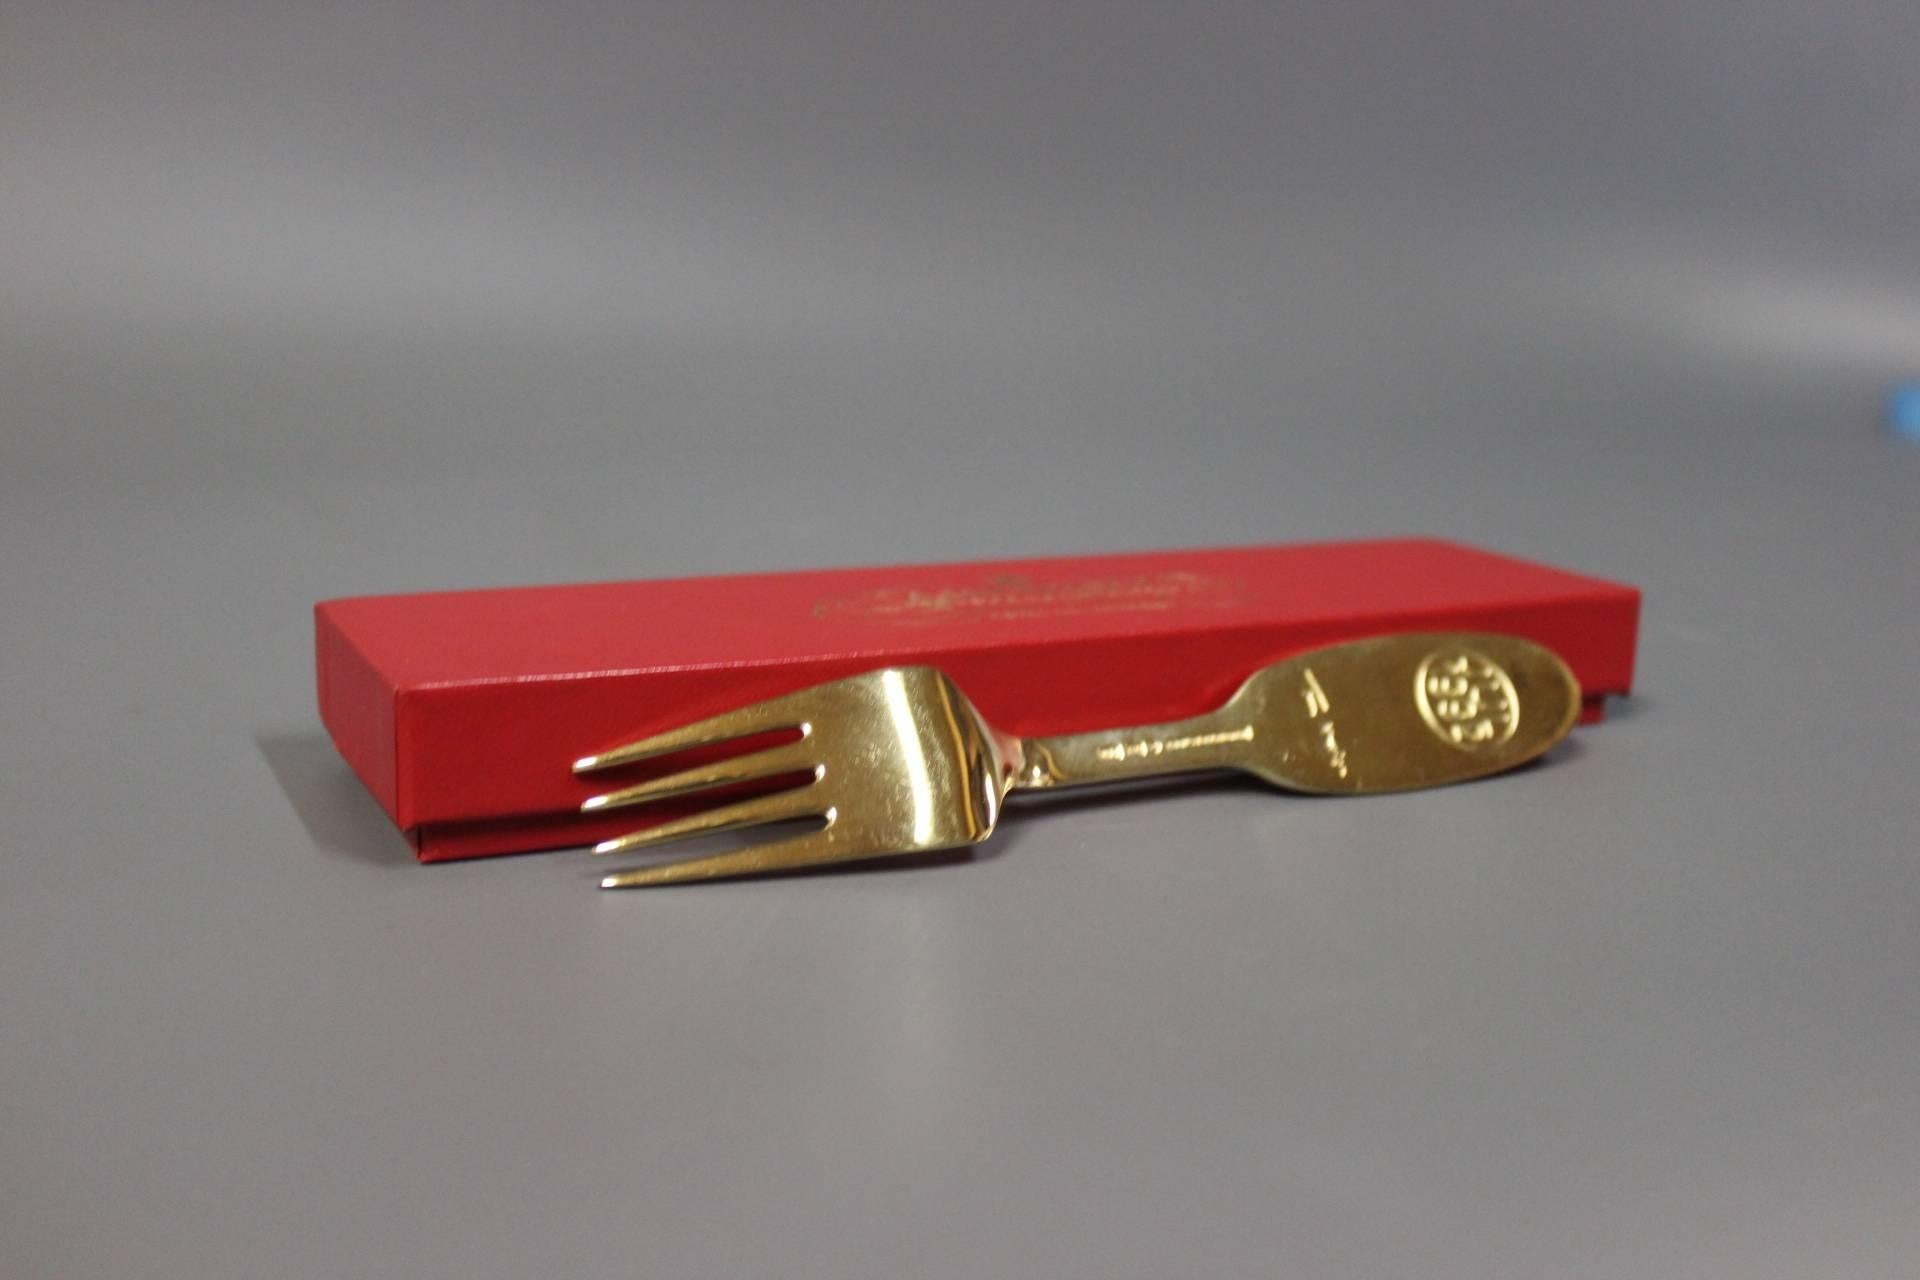 Christmas fork by A. Michelsen from 1992, gilded sterling silver 925 s. The fork is with the motif 